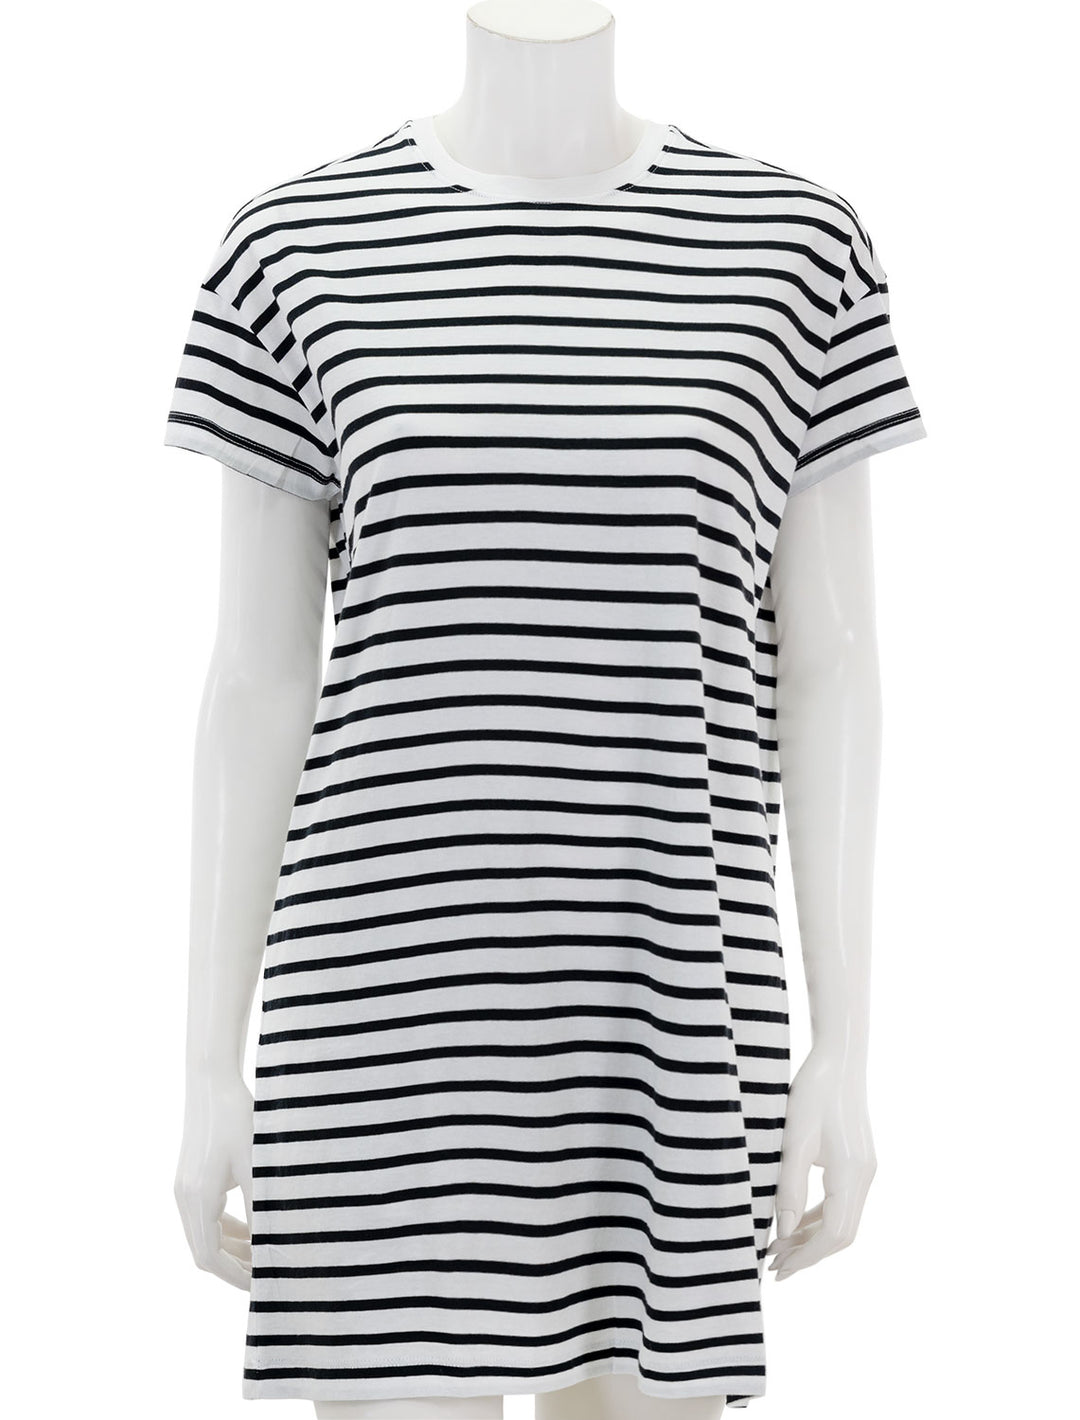 Front view of ATM's Classic Jersey Stripe Short Sleeve Dress in Black and White Stripe.